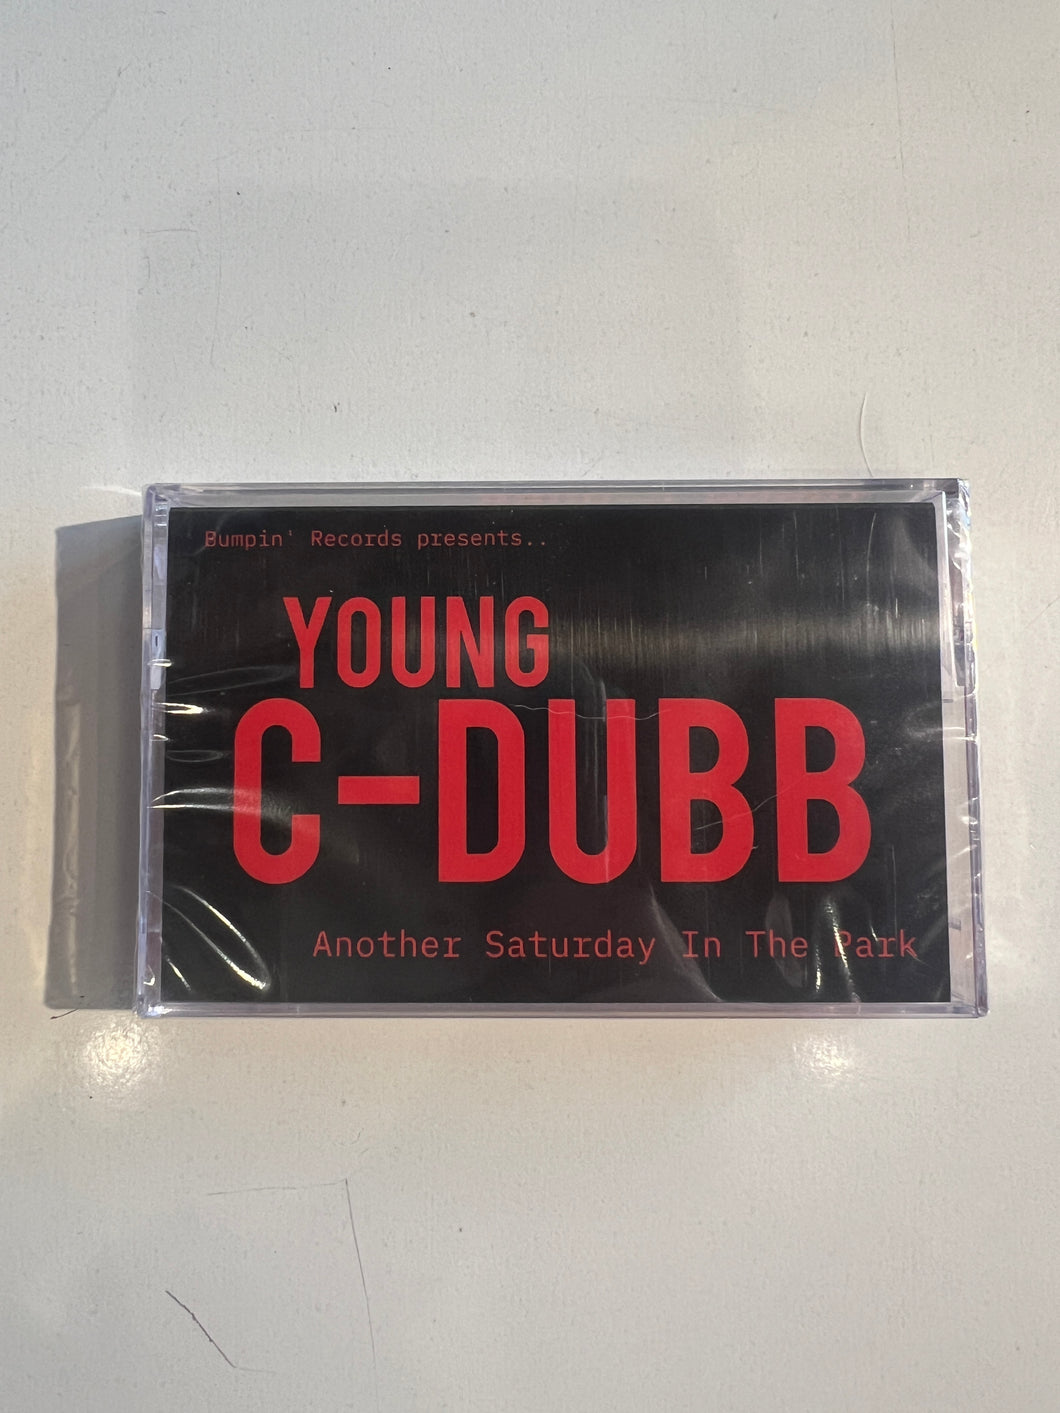 Bumpin’ Records Presents.. Young C-Dubb Another Saturday in The Park